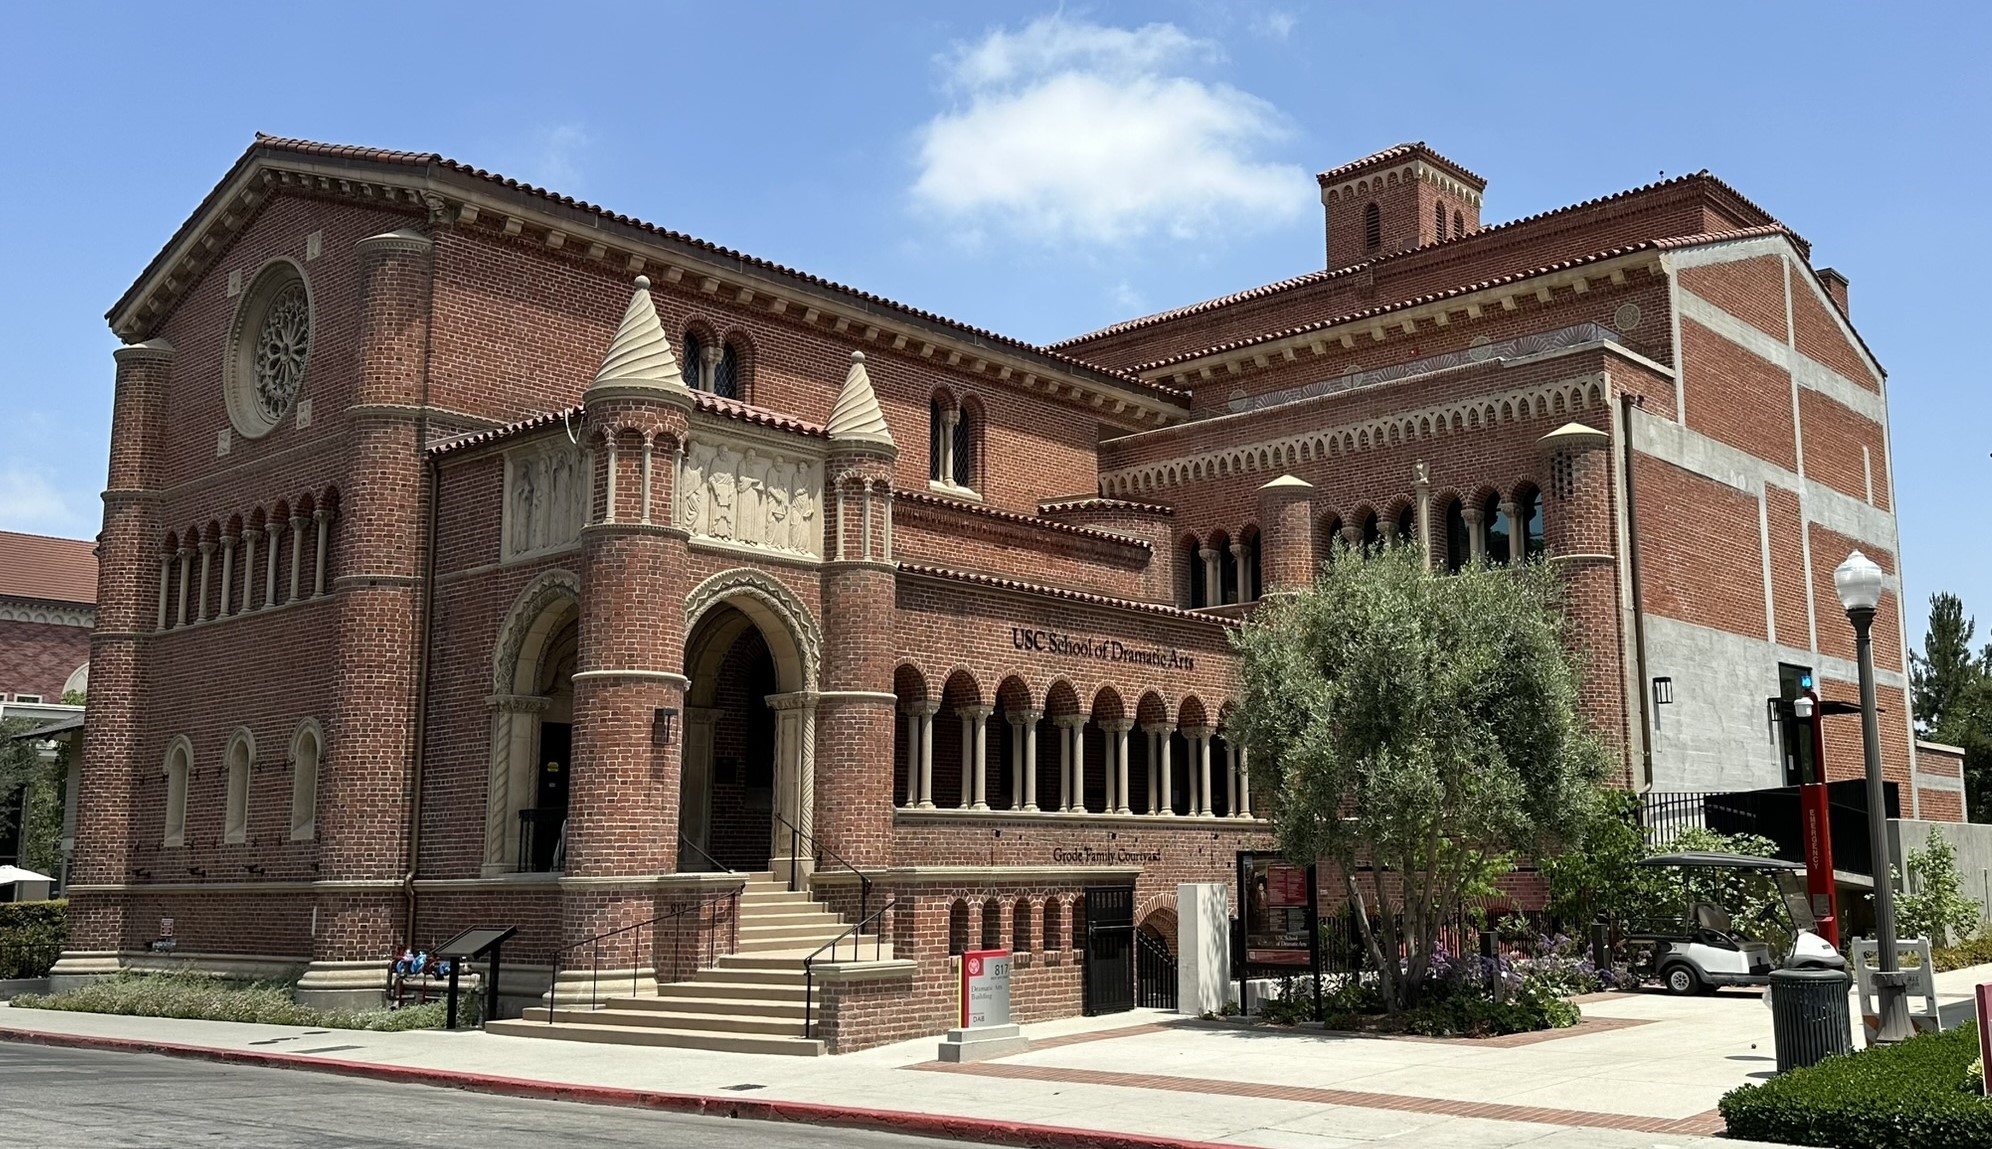 Peaceful photo of the newly opened Dramatic Arts Building on the USC campus.